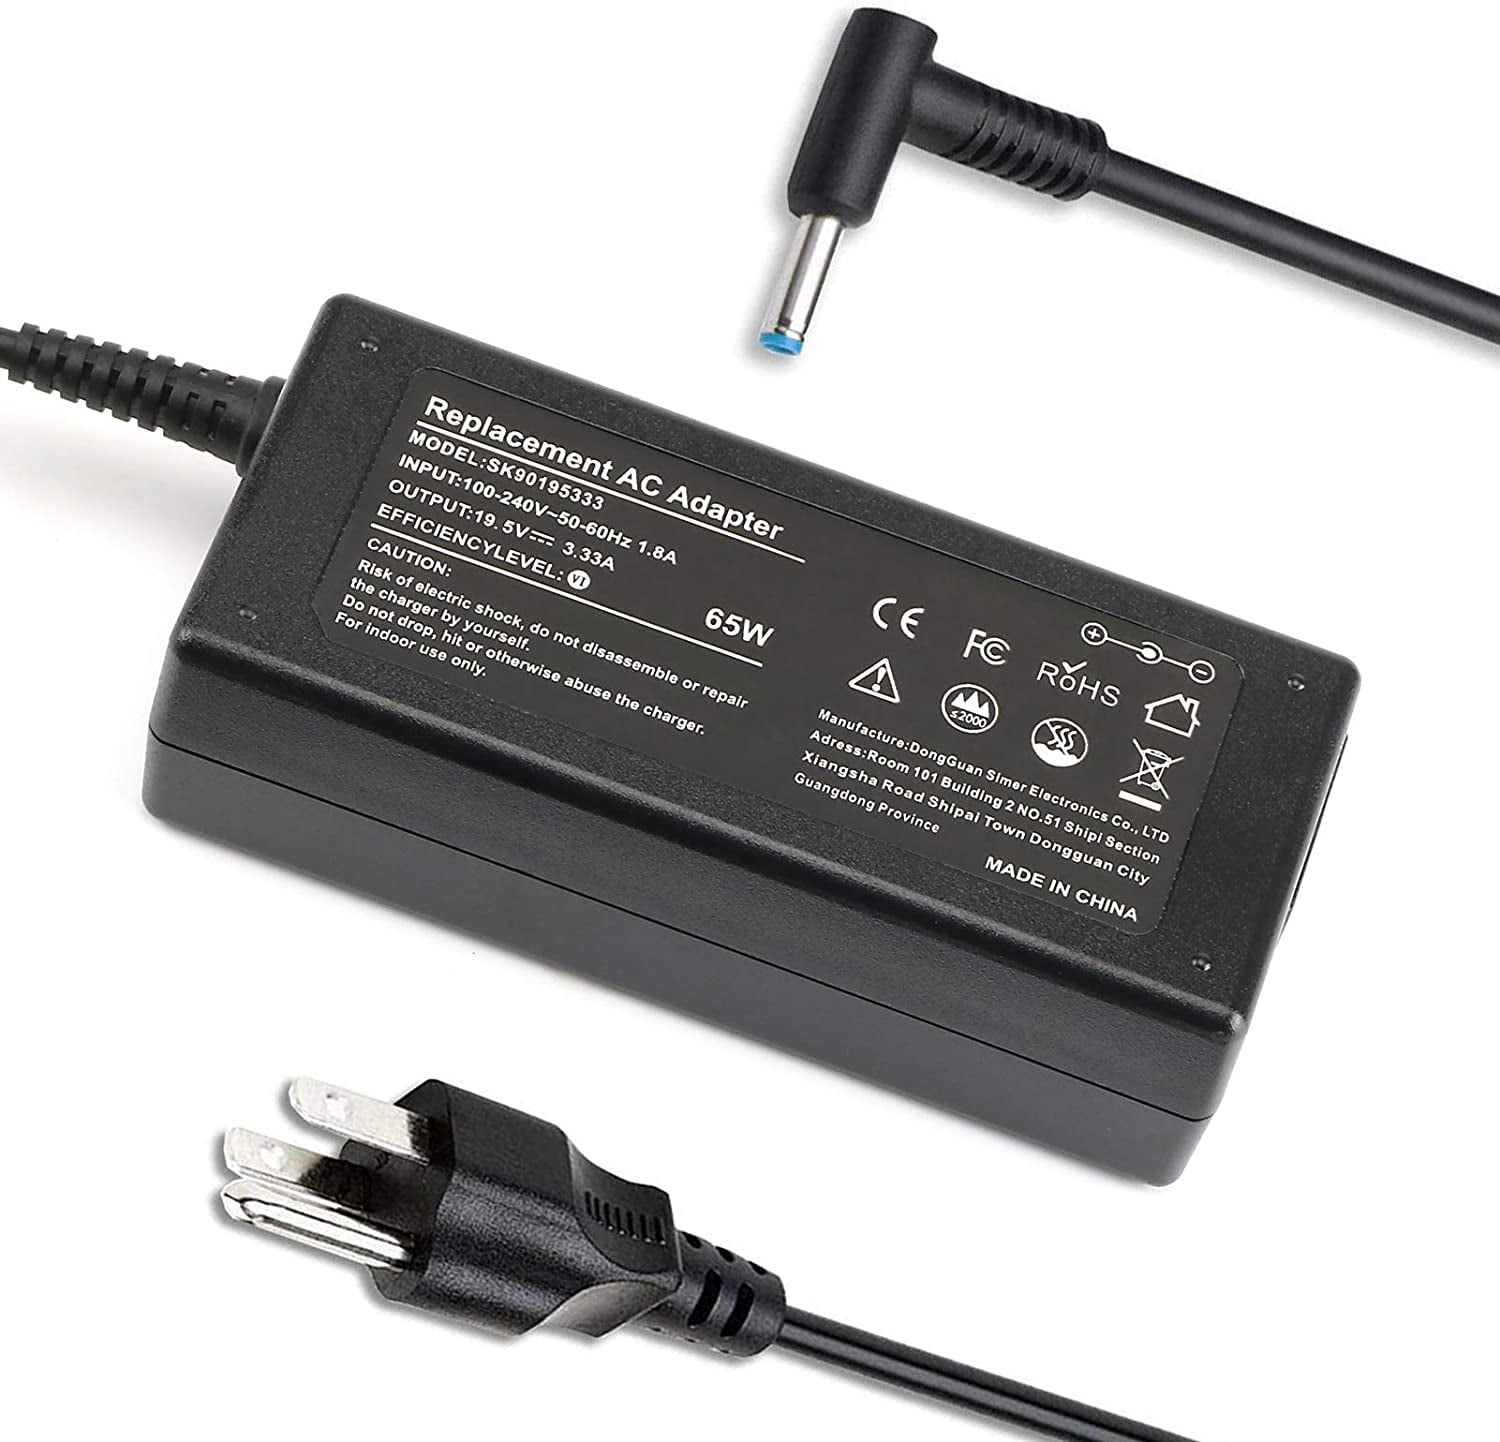 14 G4,TPN-CA04 14 G3 AC Power Adapter Charger for HP Chromebook 14 G1 